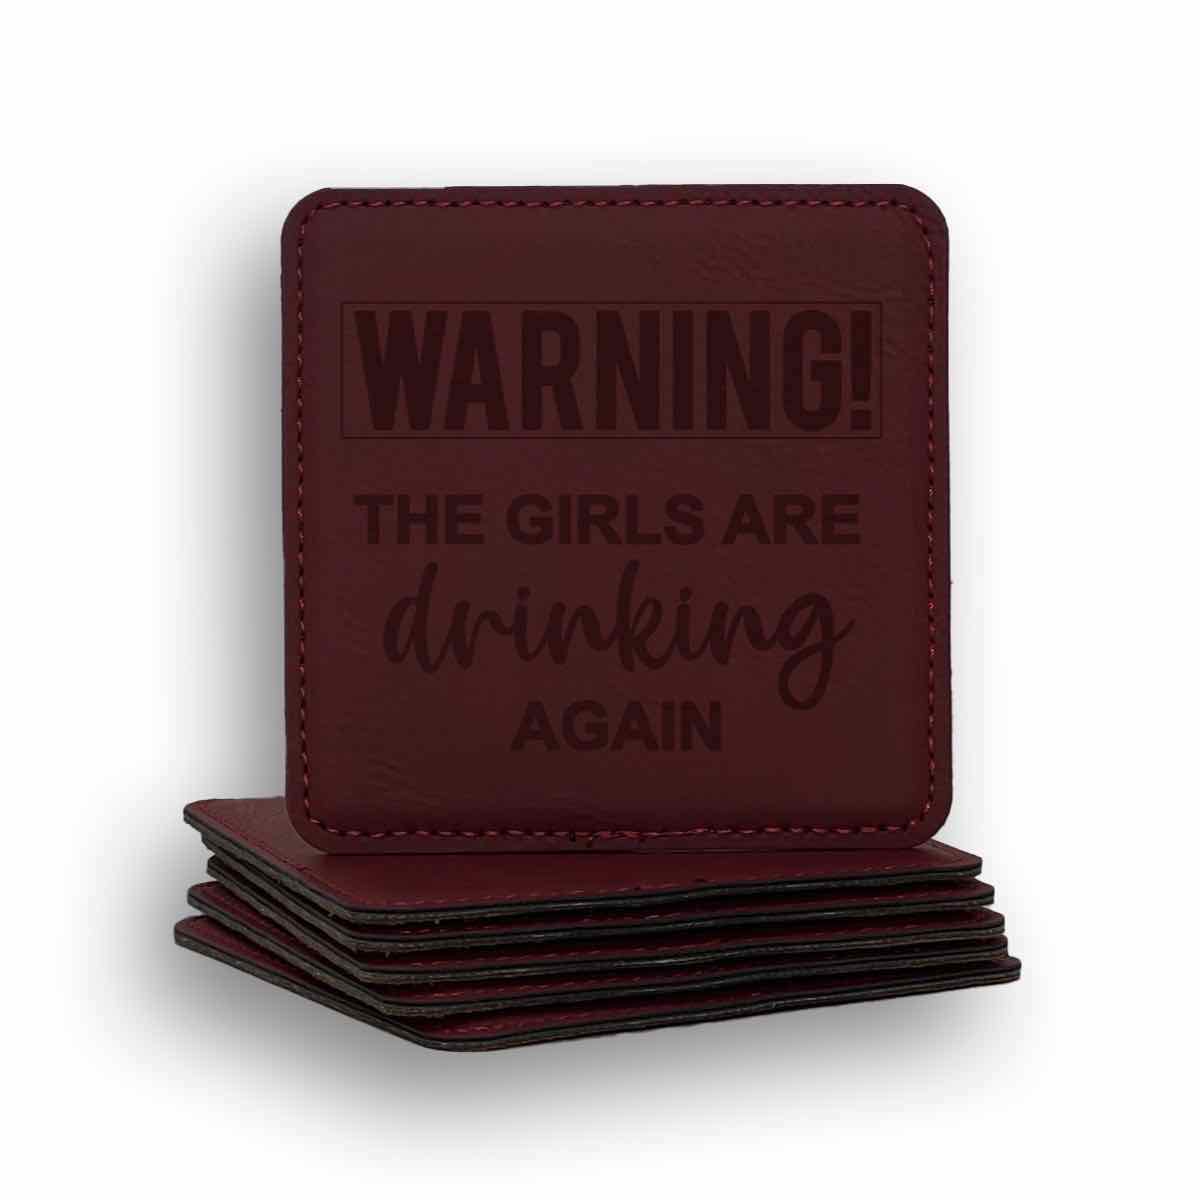 Warning The Girls Are Drinking Again Coaster